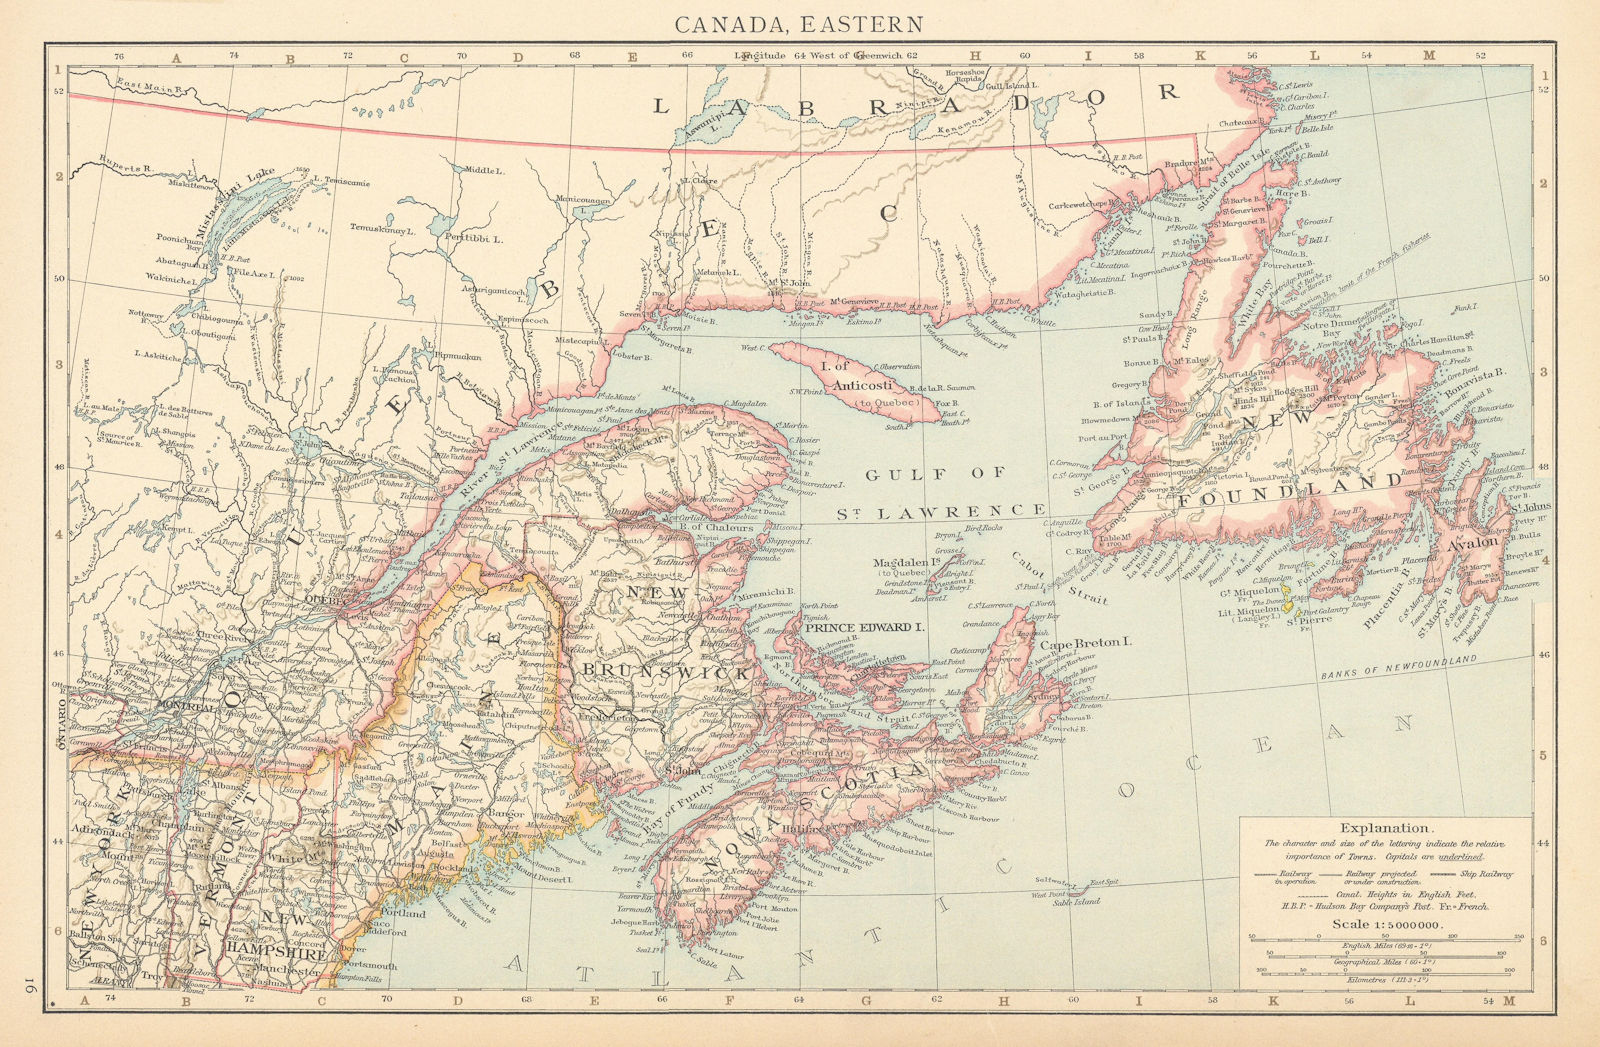 Canada, Eastern. Gulf of St Lawrence. Maritime Provinces. THE TIMES 1895 map